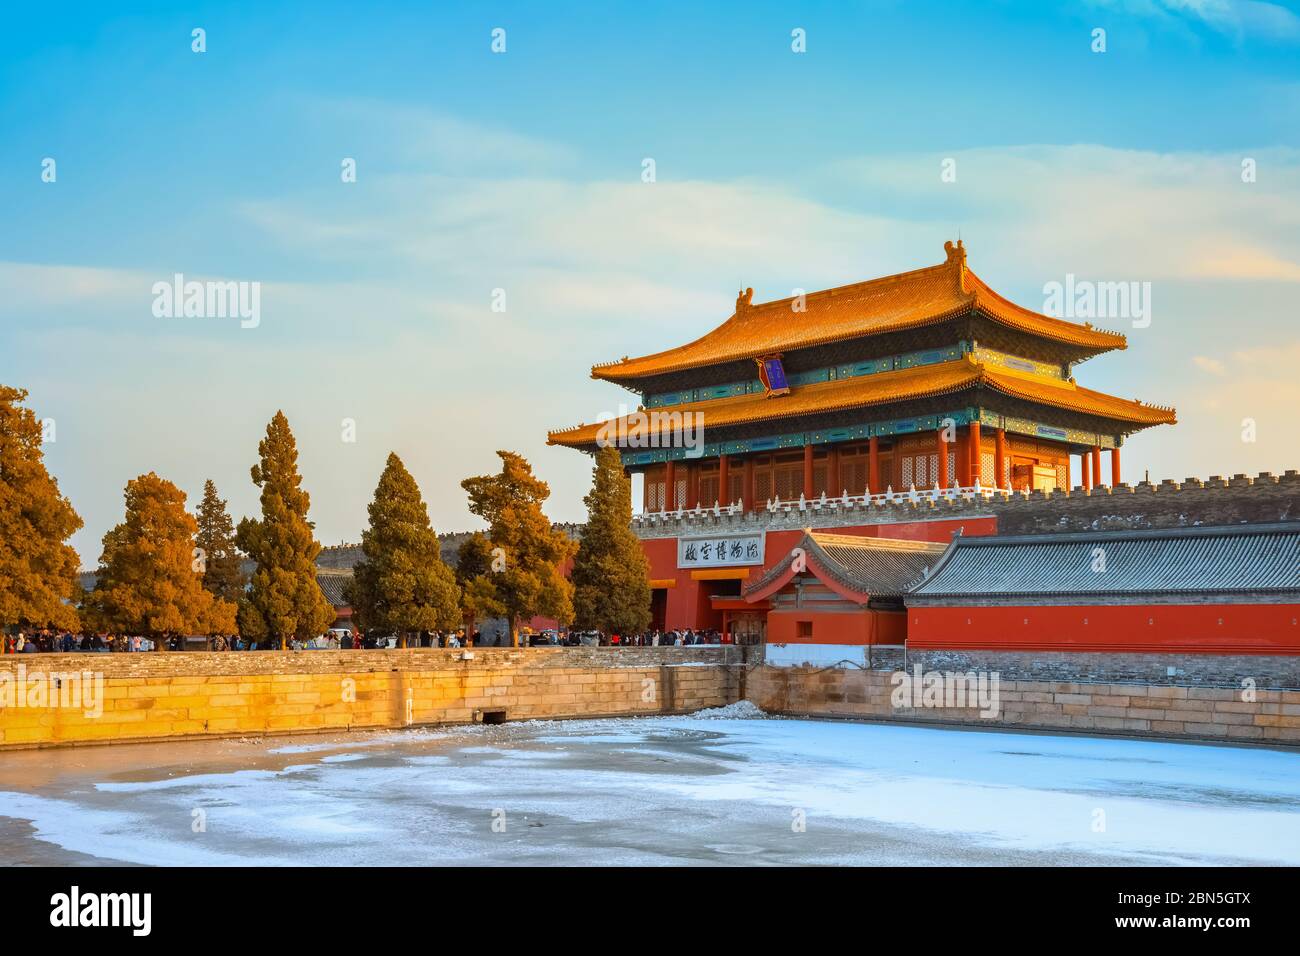 Beijing, China - Jan 9 2020: Shenwumen (Gate of Divine Prowess) built in 1420, during the 18th year of Yongle Emperor's reign, it's the back gate of t Stock Photo